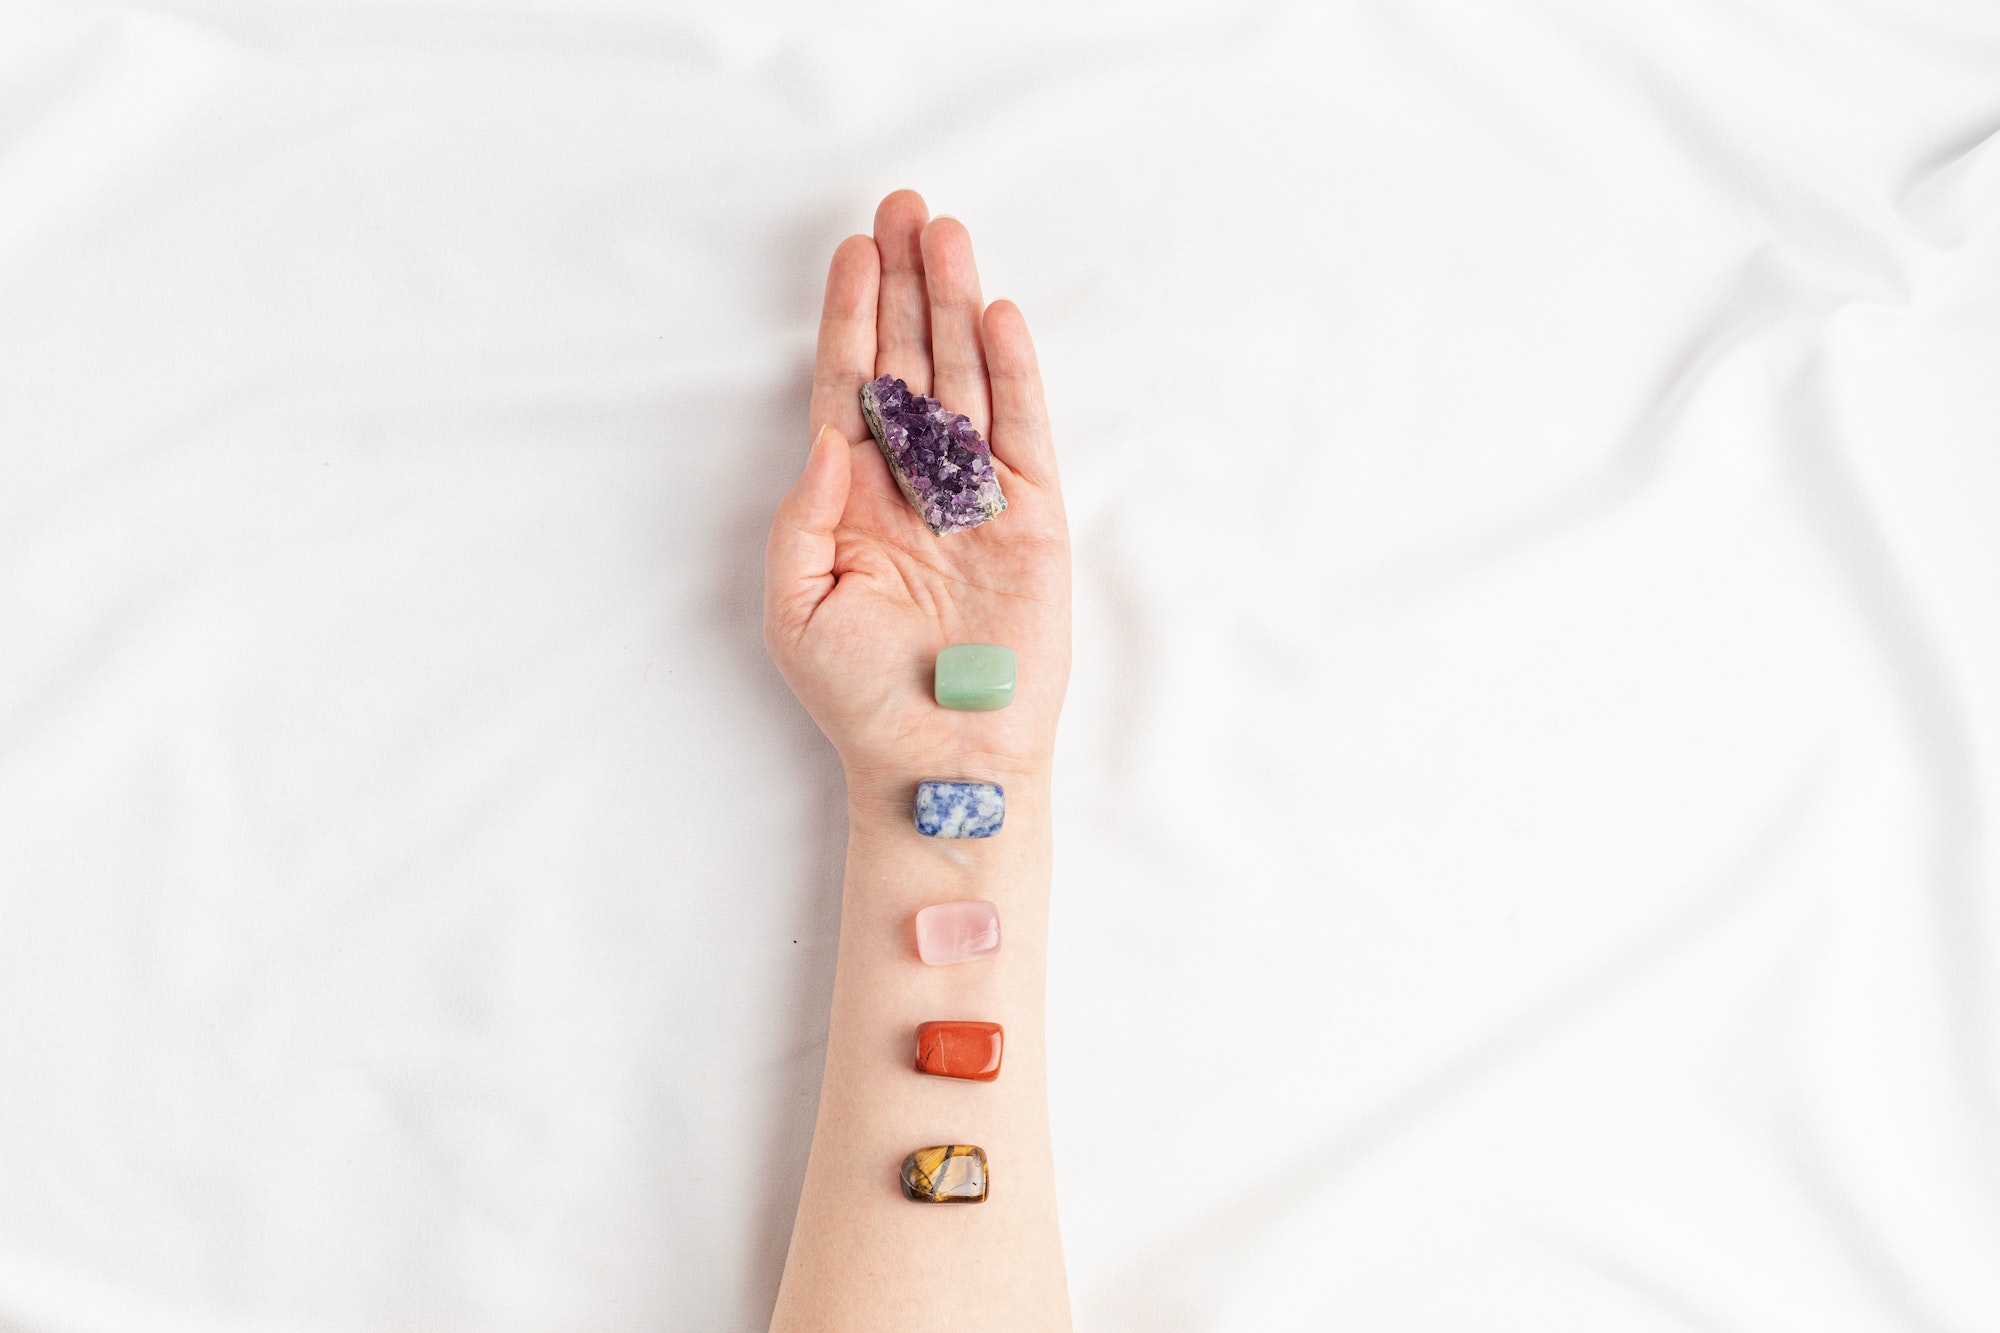 Healing reiki chakra crystals on woman's hands. Gemstones for wellbeing, meditation, relaxation